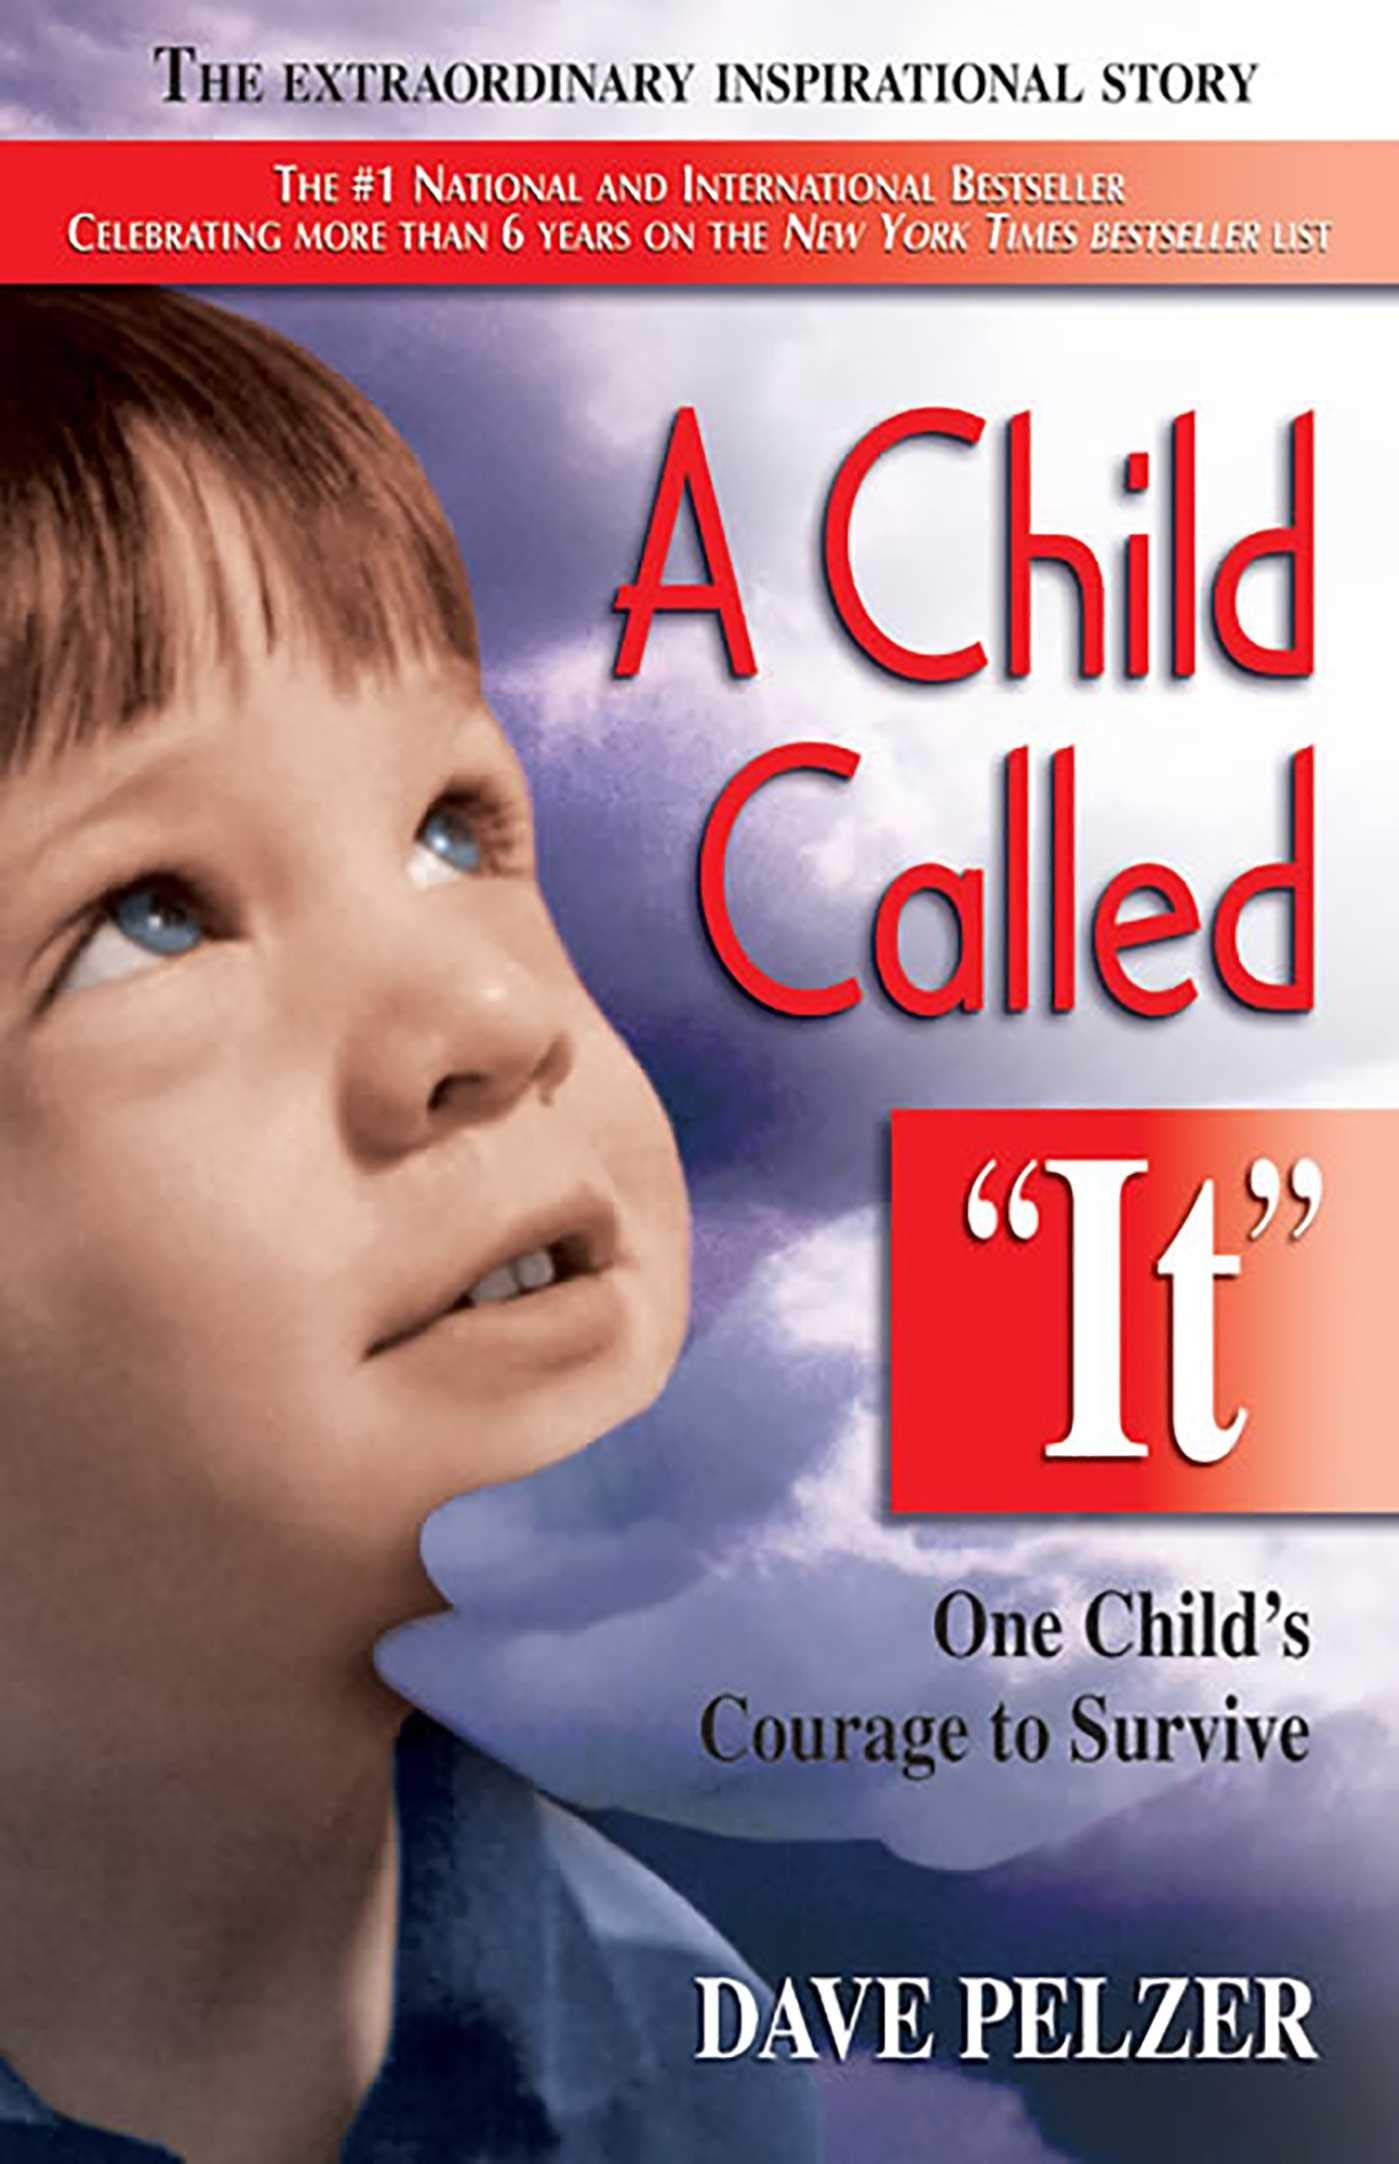 A Child Called "It," by Dave Pelzer